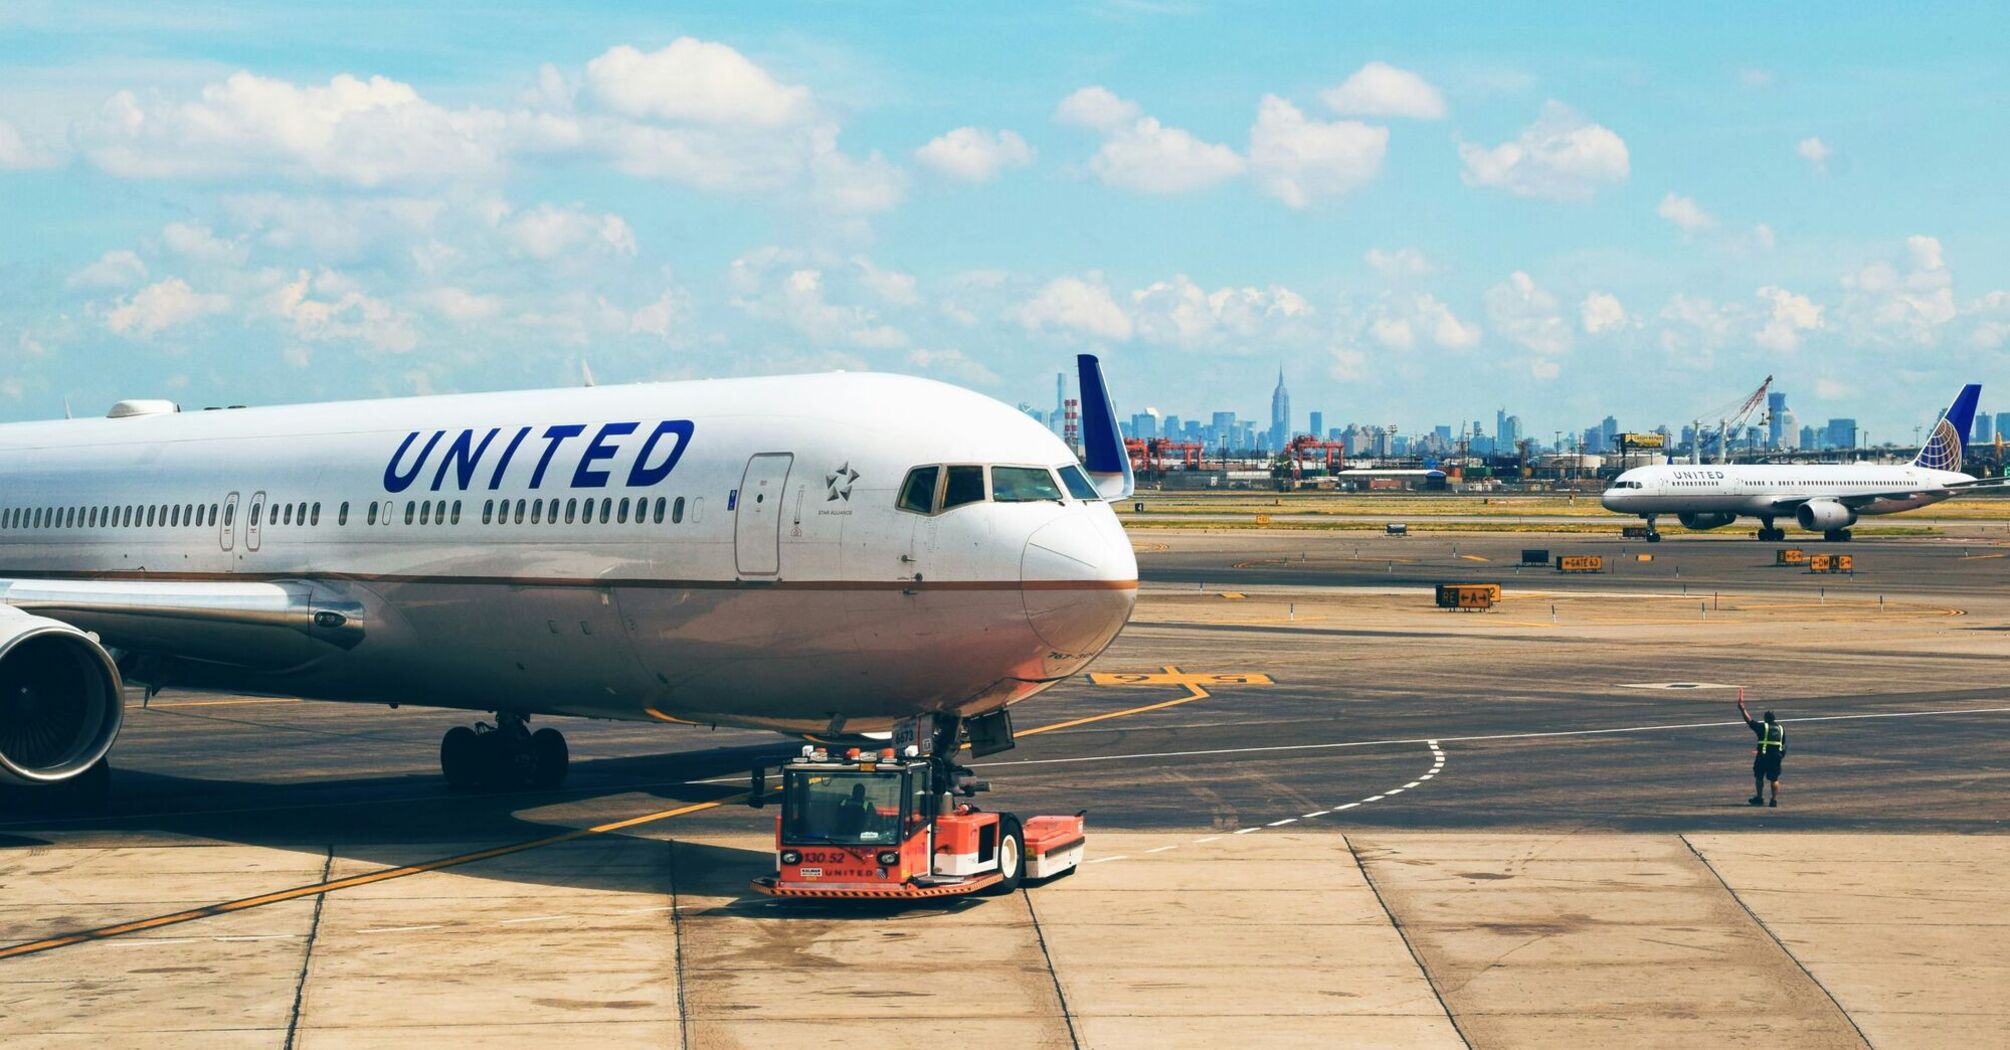 United Airlines plane at the Newark Liberty International Airport Parking